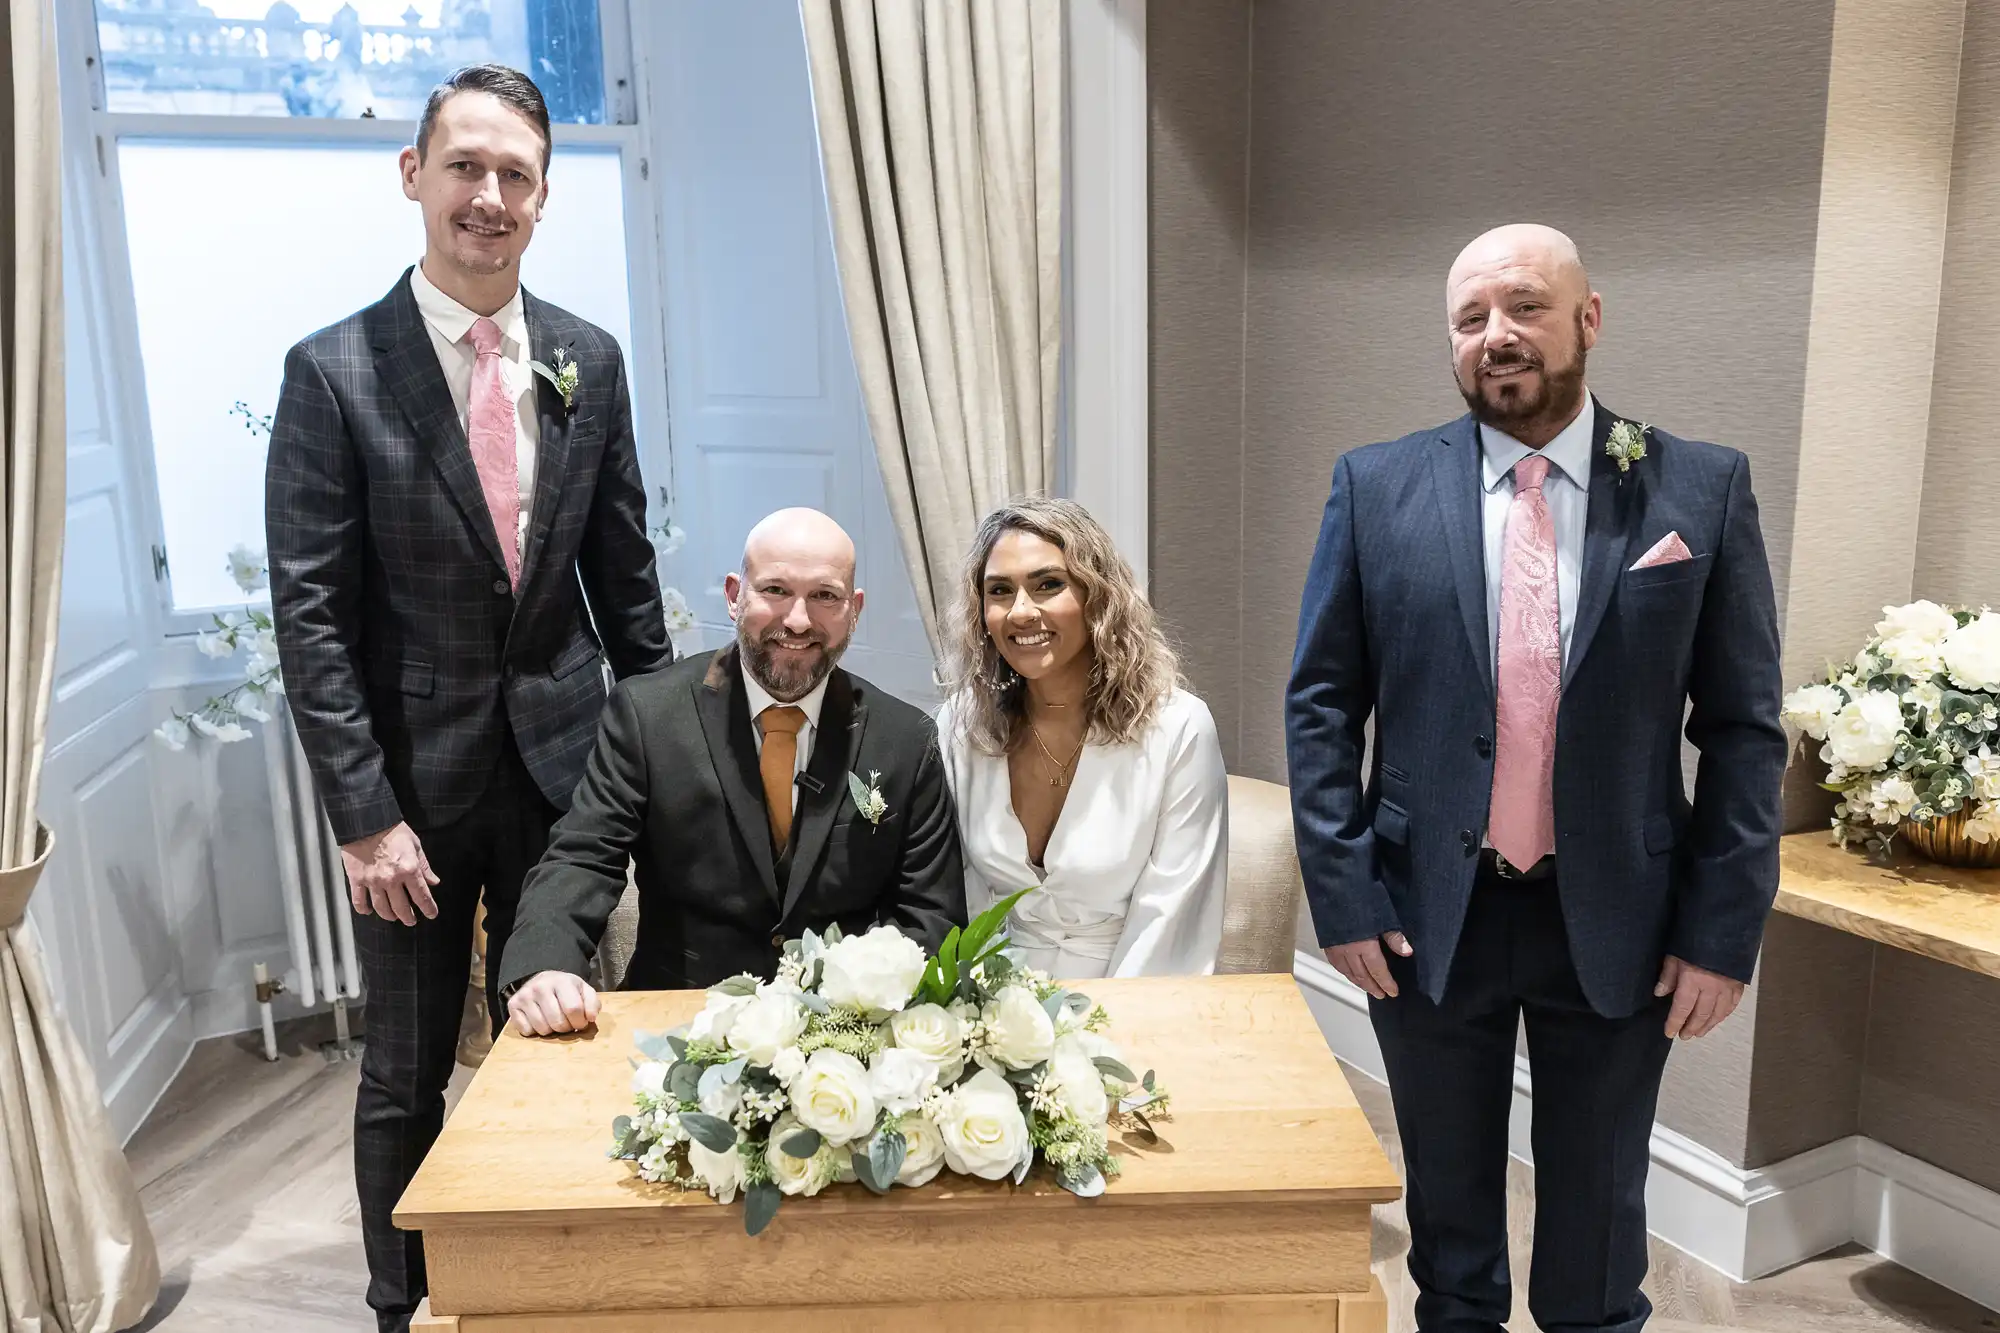 Four people dressed in formal attire pose around a small wooden table with a floral arrangement in what appears to be a wedding ceremony setting.